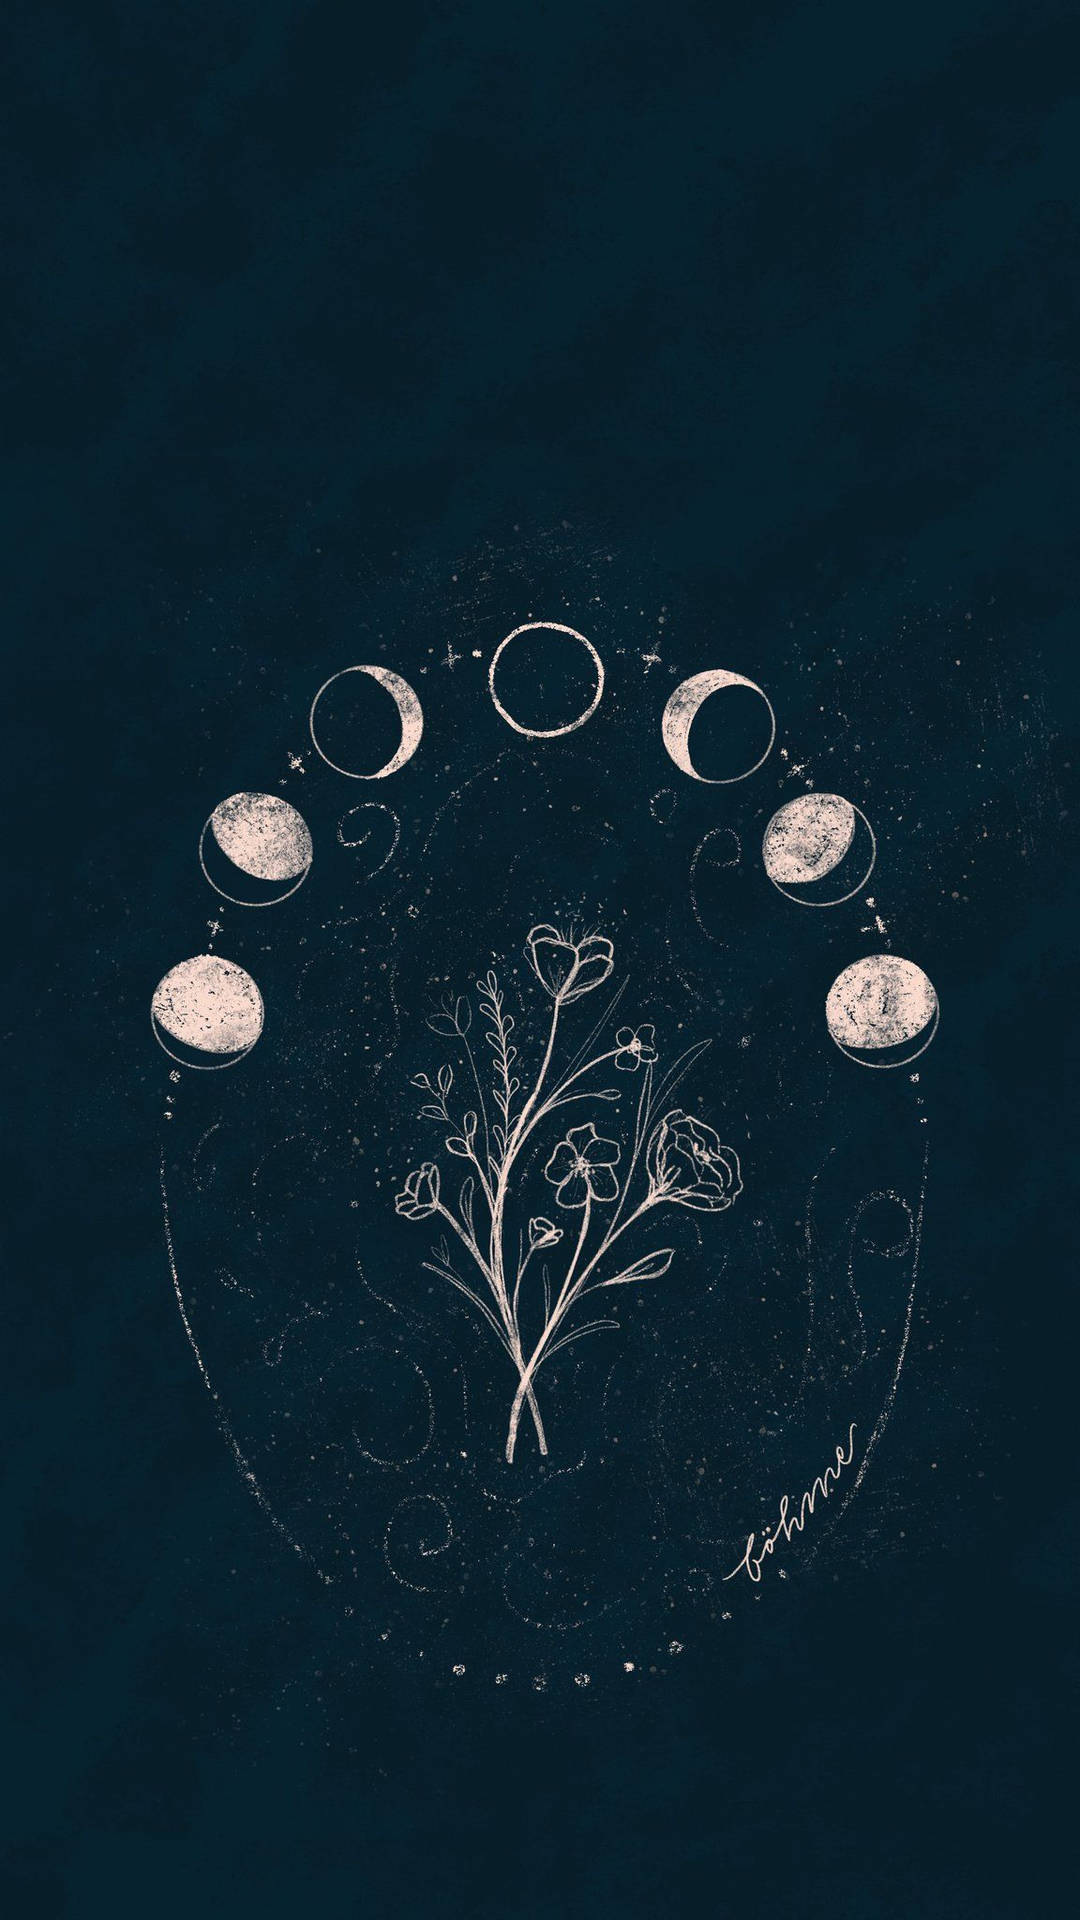 Witchy Aesthetic Moon Flowers Wallpaper